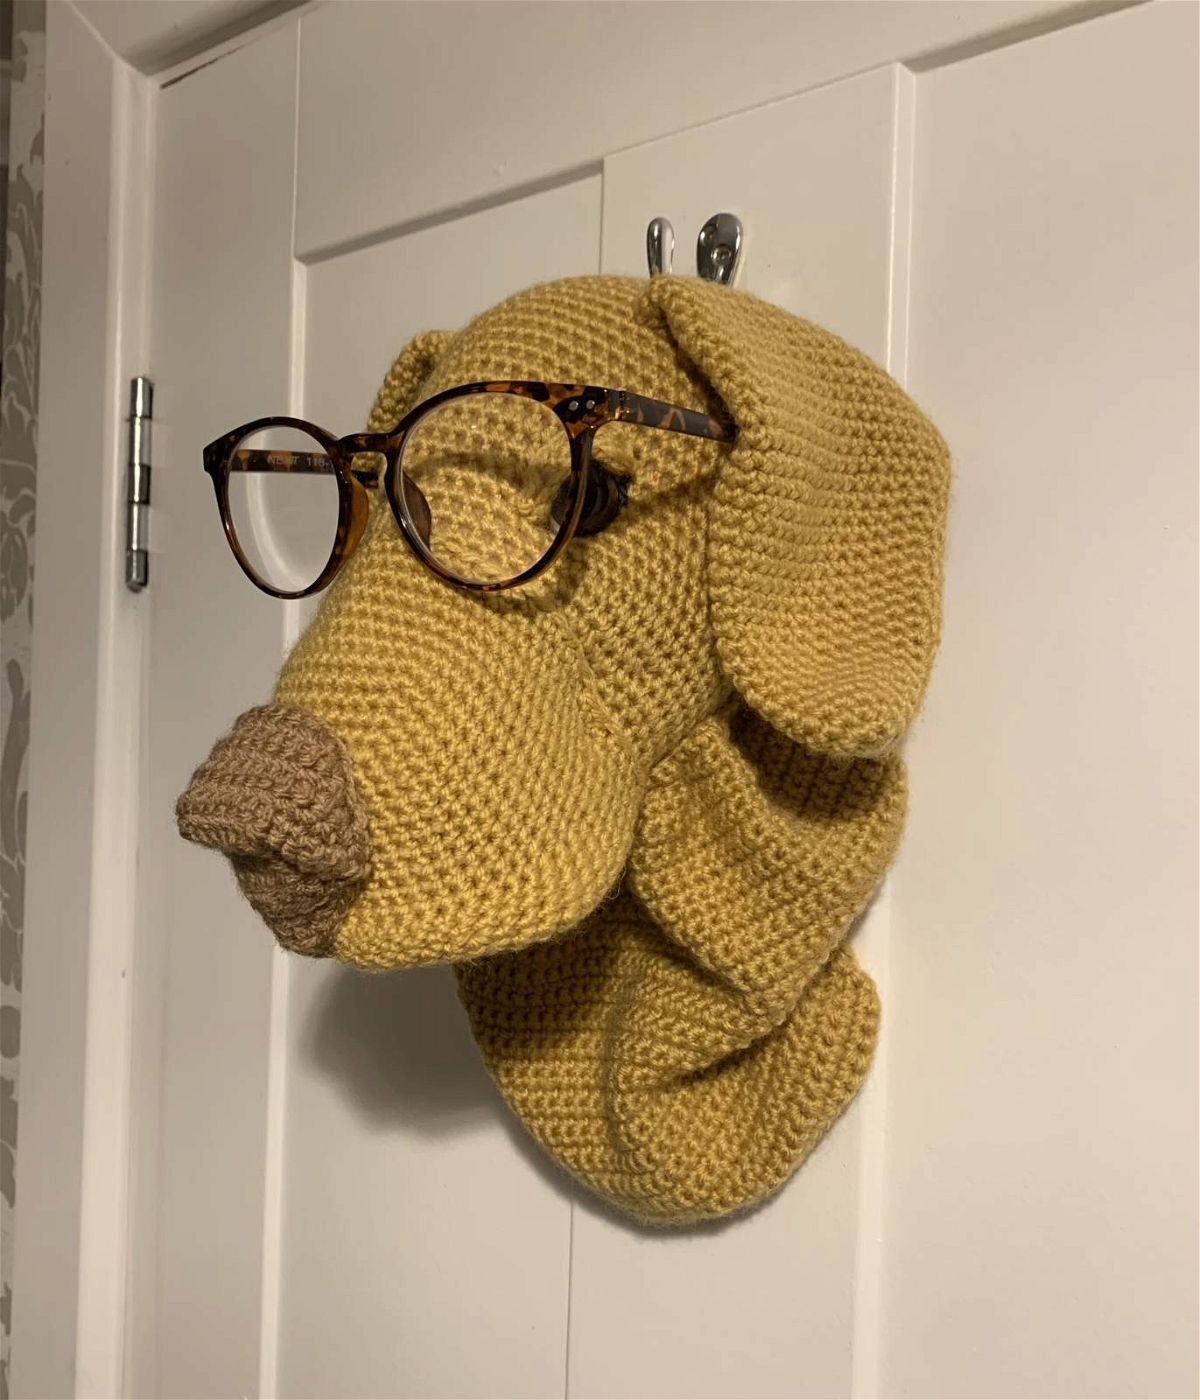 Crochet Amigurumi Labrador Dog Pattern Review by Alison Peters for Cottontail and Whiskers